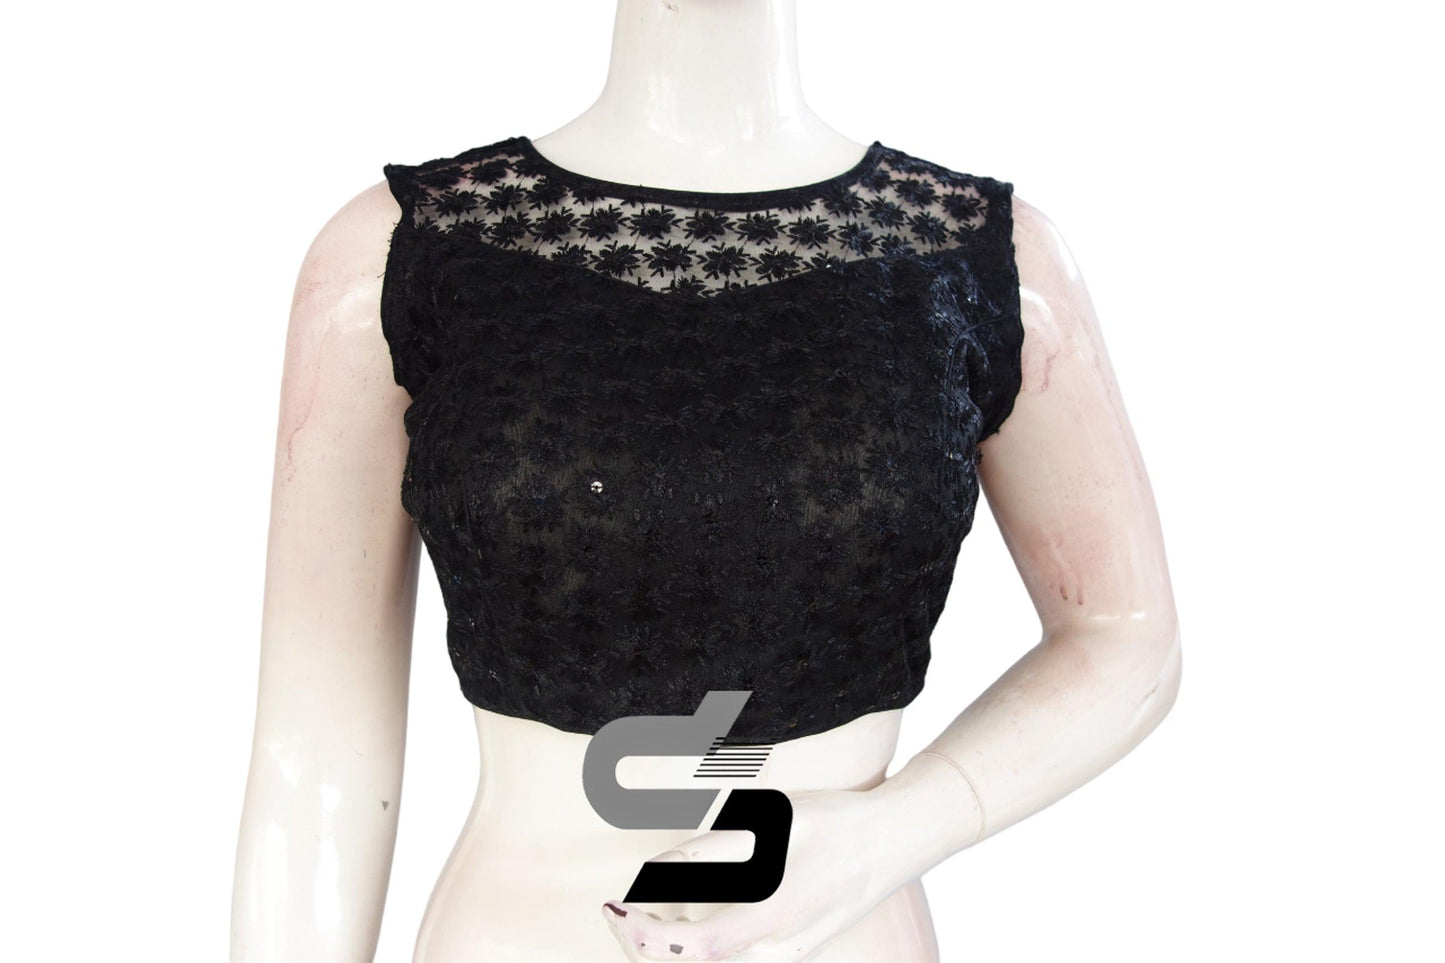 Black Color Netted Sleeveless Readymade Saree Blouse - D3blouses